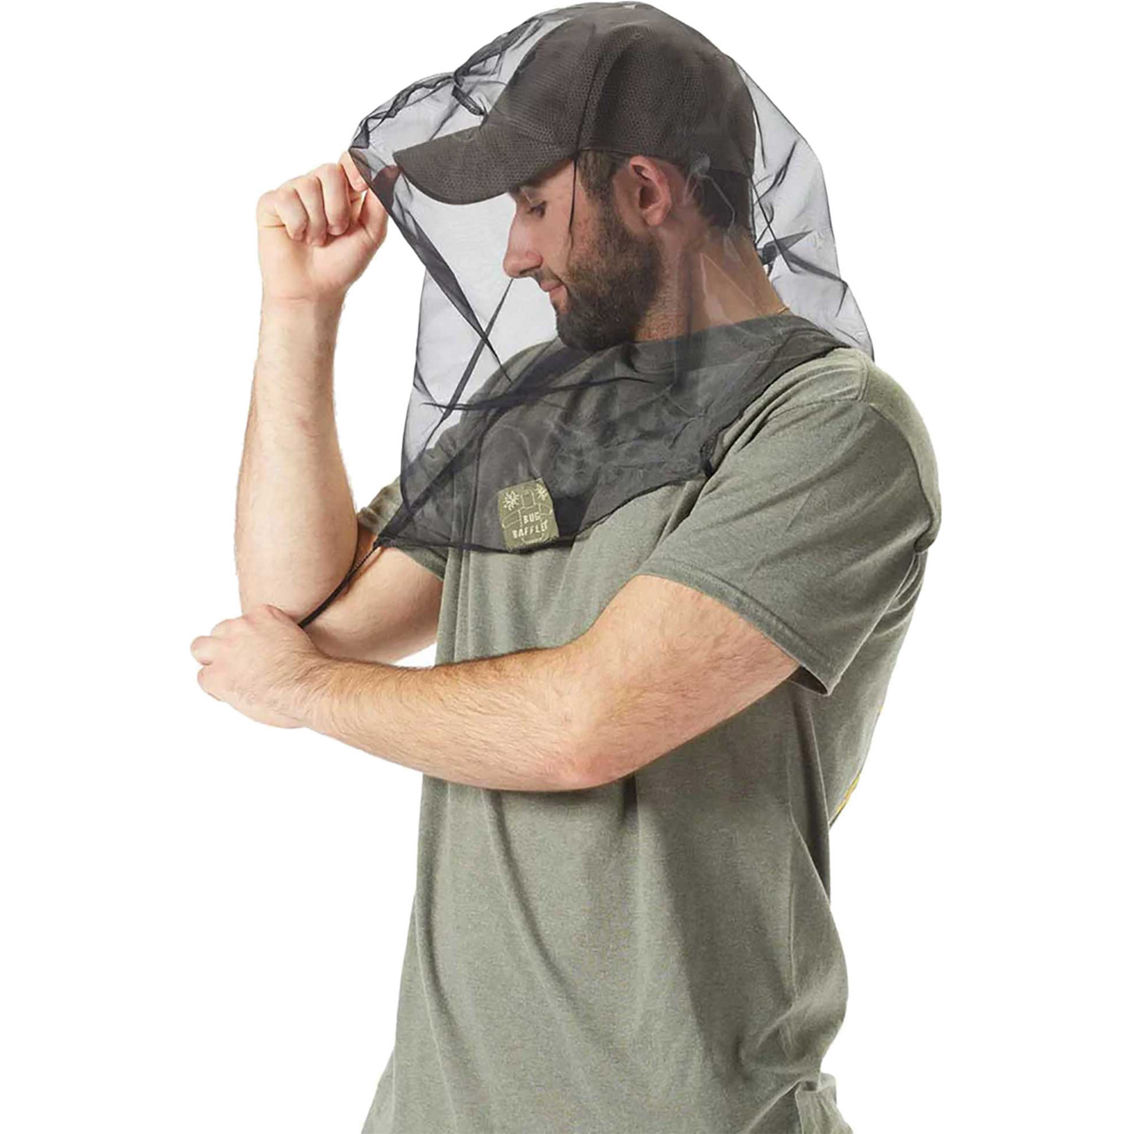 Brigade QM BugBaffler Insect Protective Headnet - Image 3 of 3